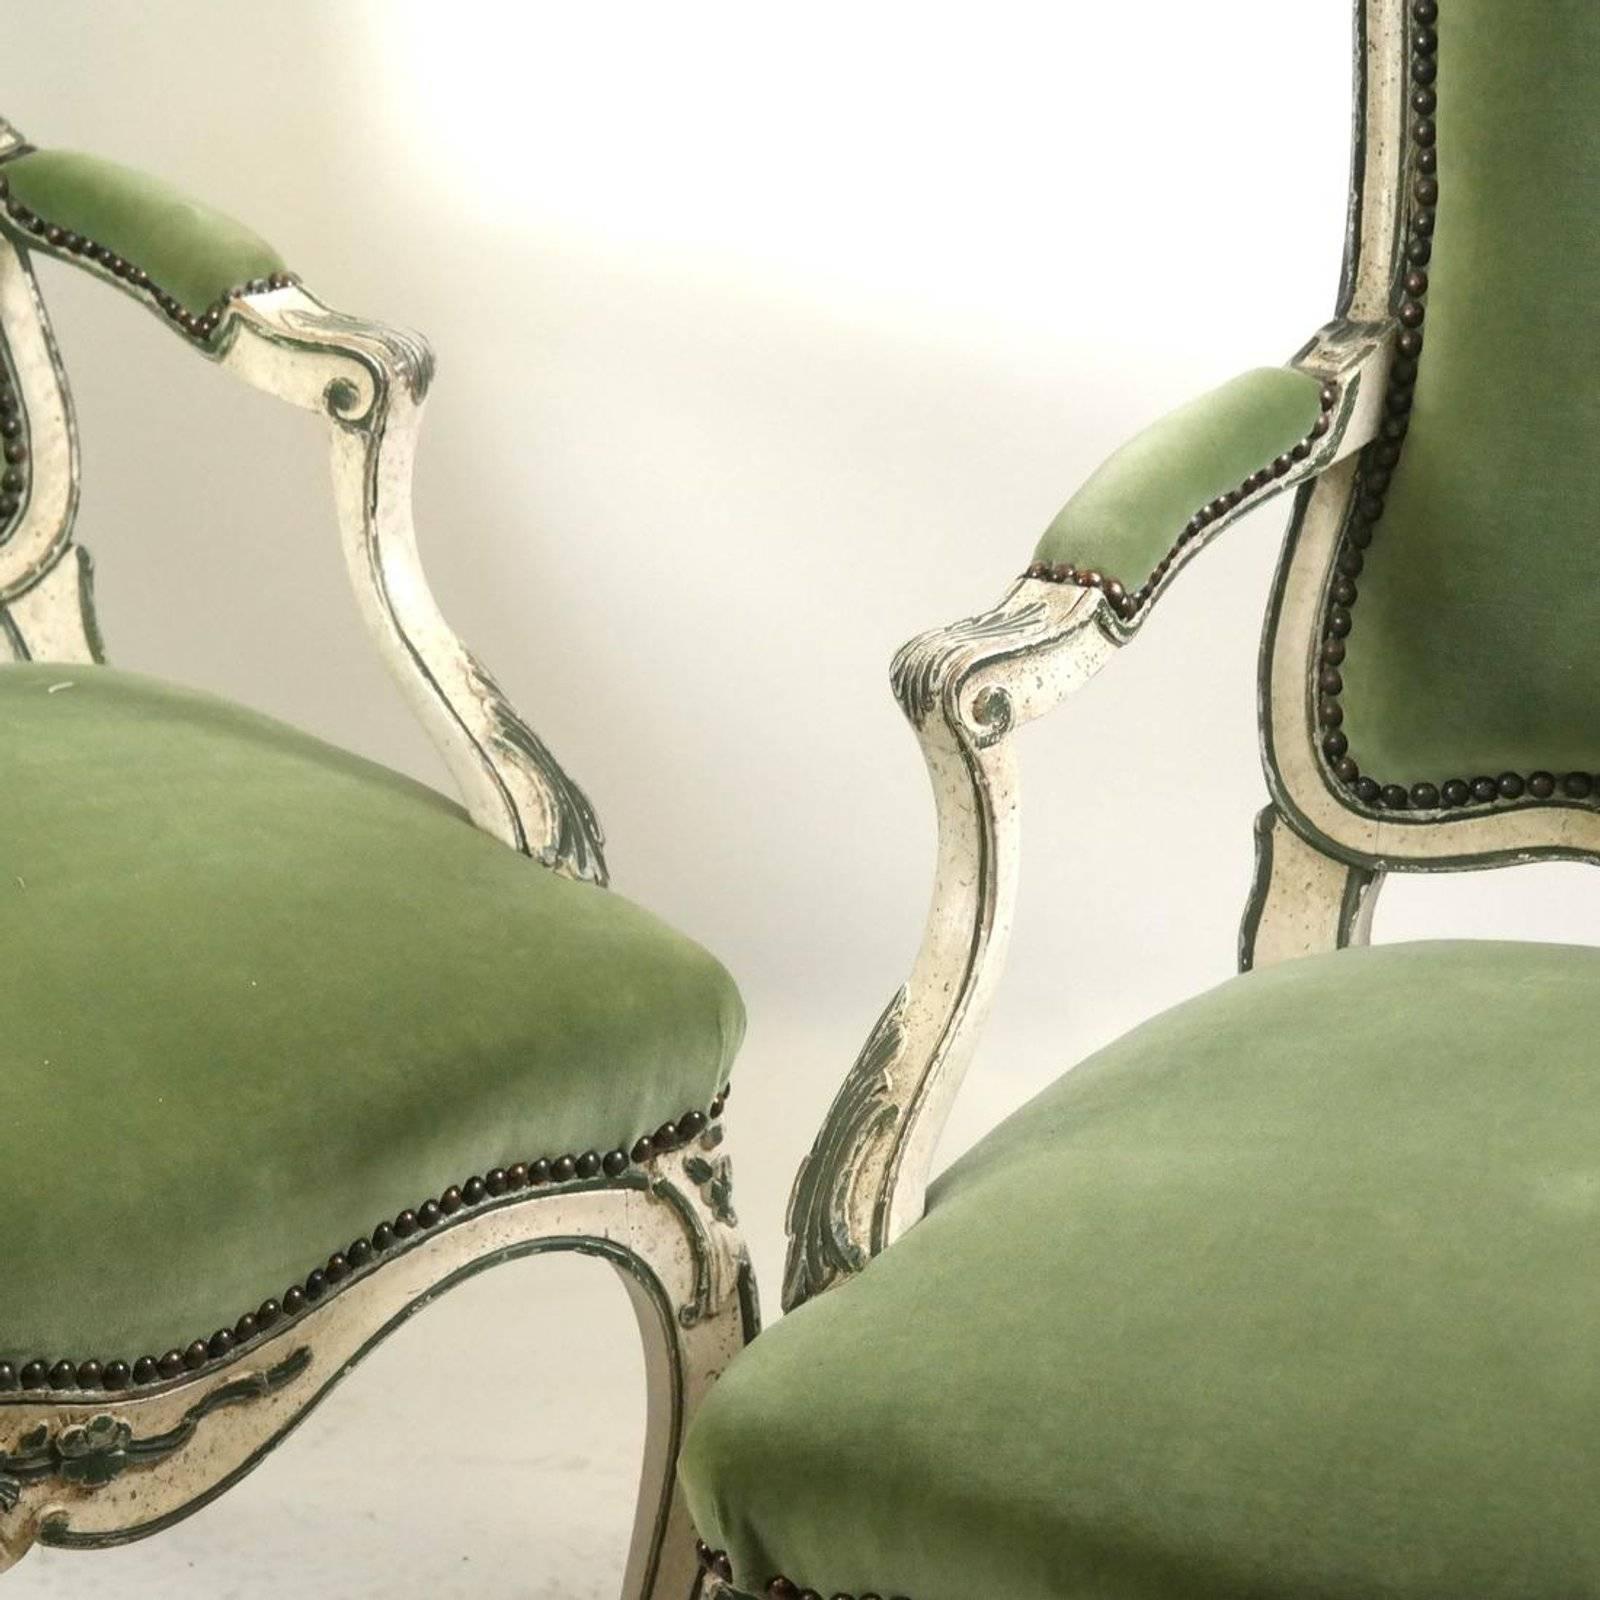 Fine pair of Louis XV style Bergeres or Fauteuils-á-la-Reine,
Elegant proportions carved painted walnut in antique white and green. These chairs are fine examples of 18th century French refined furniture design of the late 1700s, yet easily mix